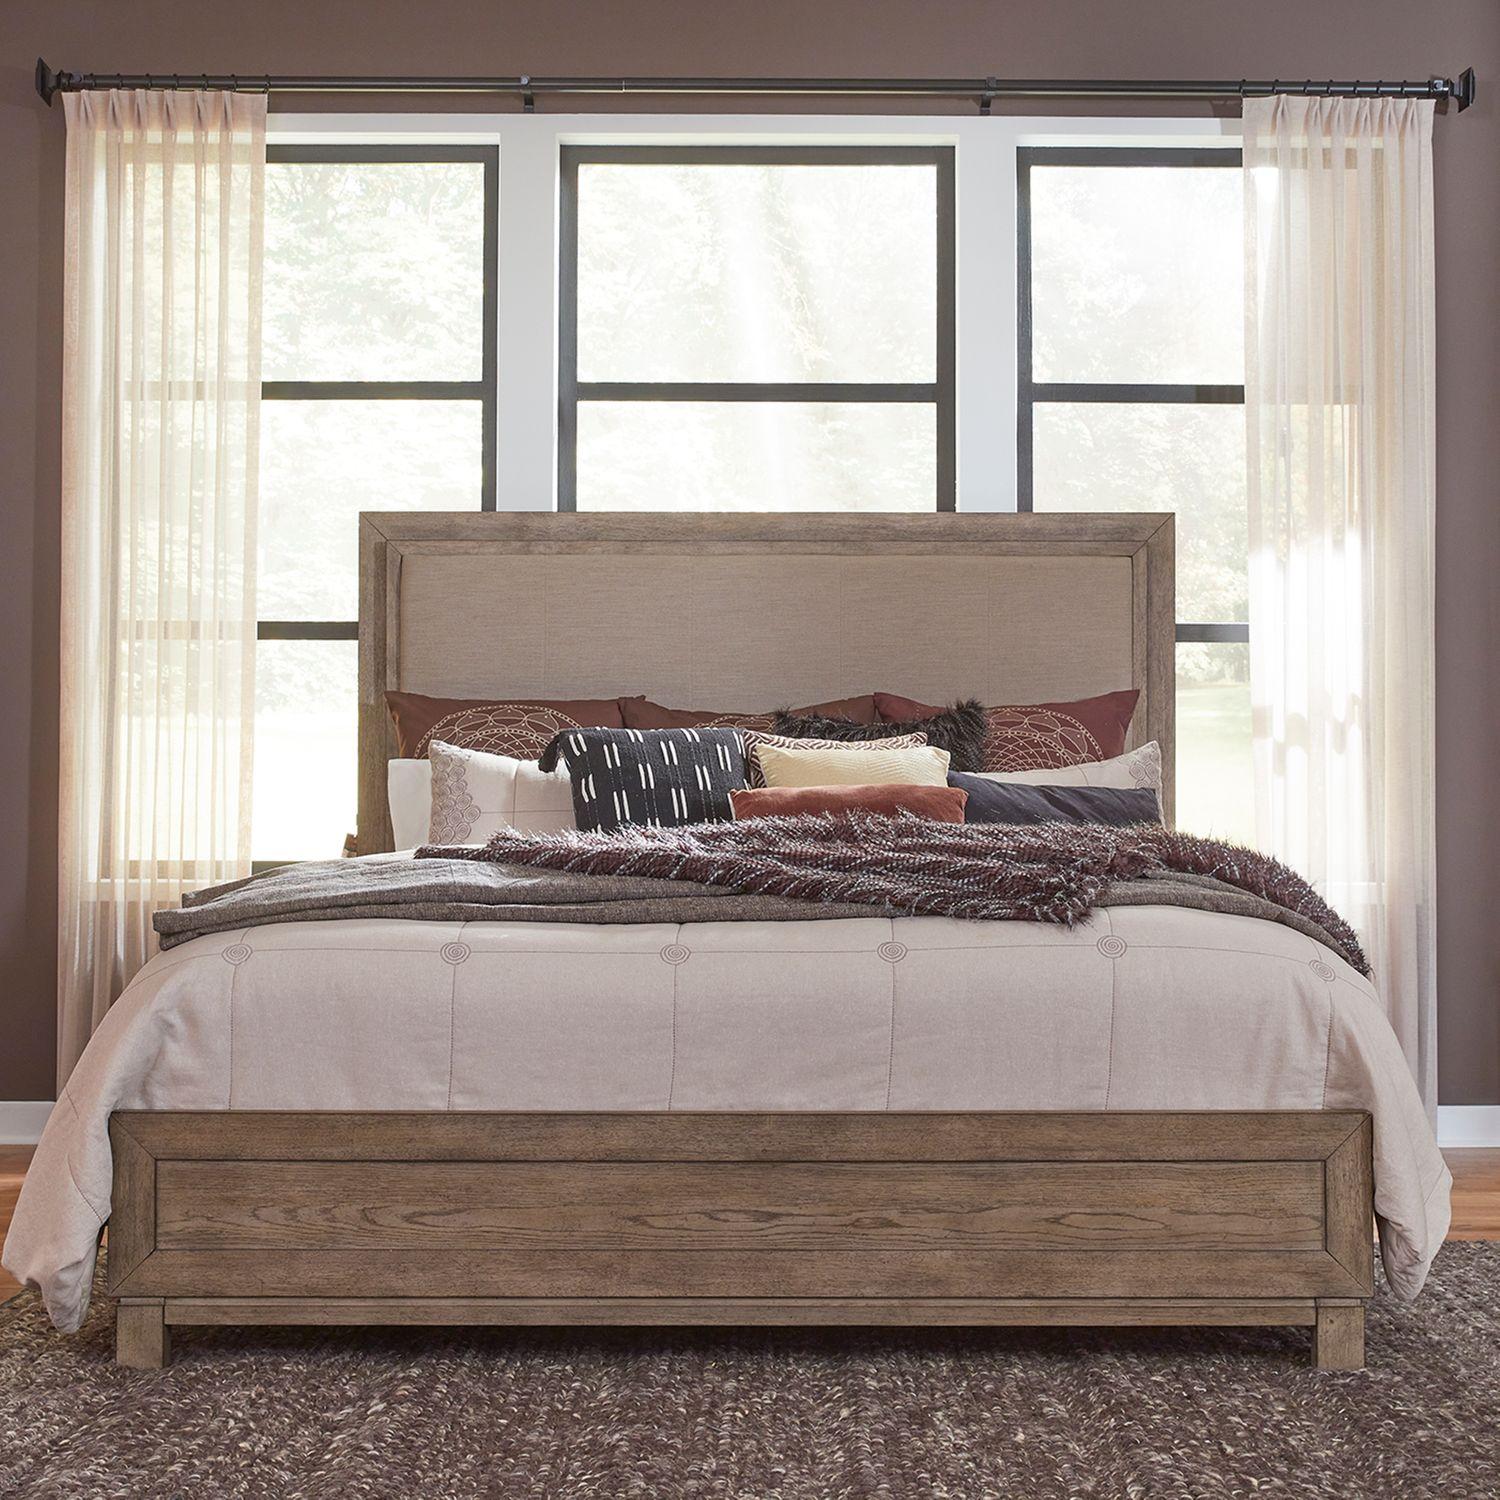 Classic Platform Bed Canyon Road (876-BR) 876-BR-QUB in Brown Linen